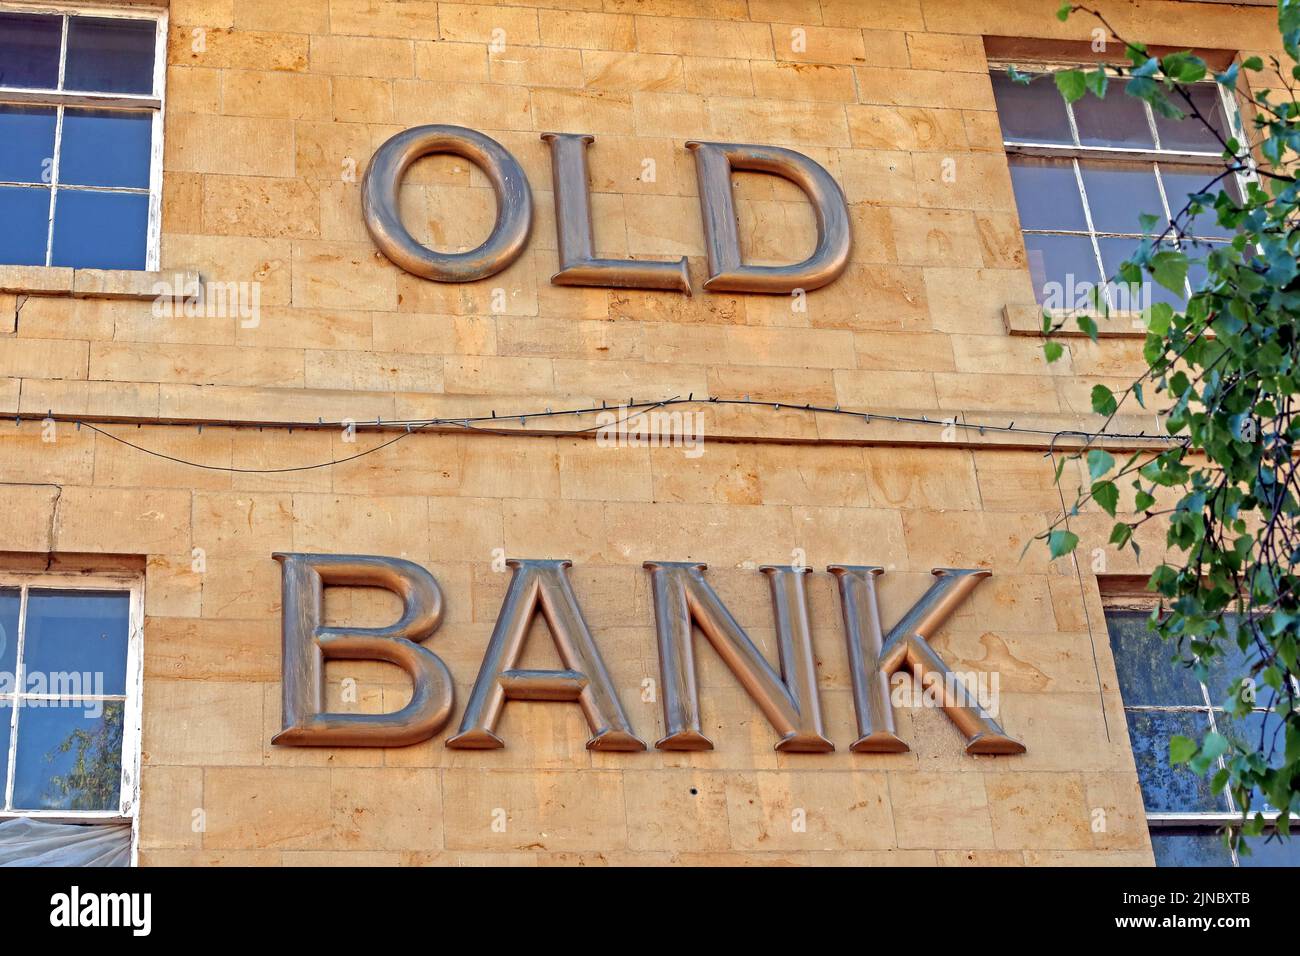 Cartello Old Bank, Midland Bank, High St, Moreton-in-Marsh, Evenlode Valley, Cotswolds, Oxfordshire, Inghilterra, Regno Unito, GL56 0BD Foto Stock